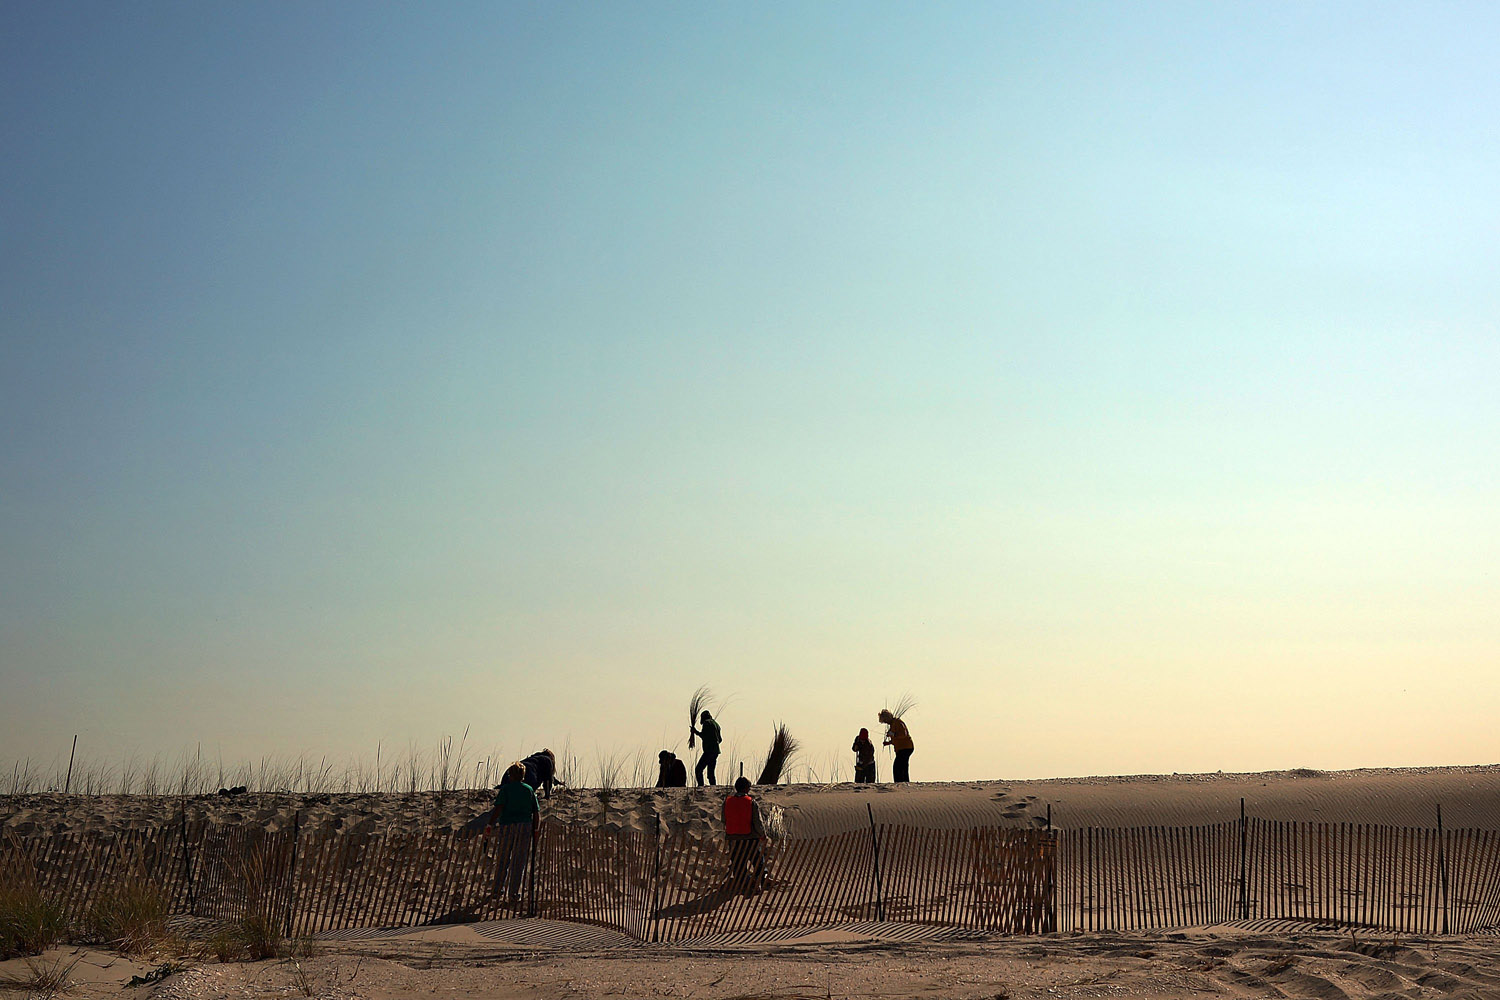 Oct. 29, 2013. Residents plant beach grass on protective sand dunes in the Breezy Point neighborhood on the one-year anniversary of Hurricane Sandy in the Queens borough of New York City.